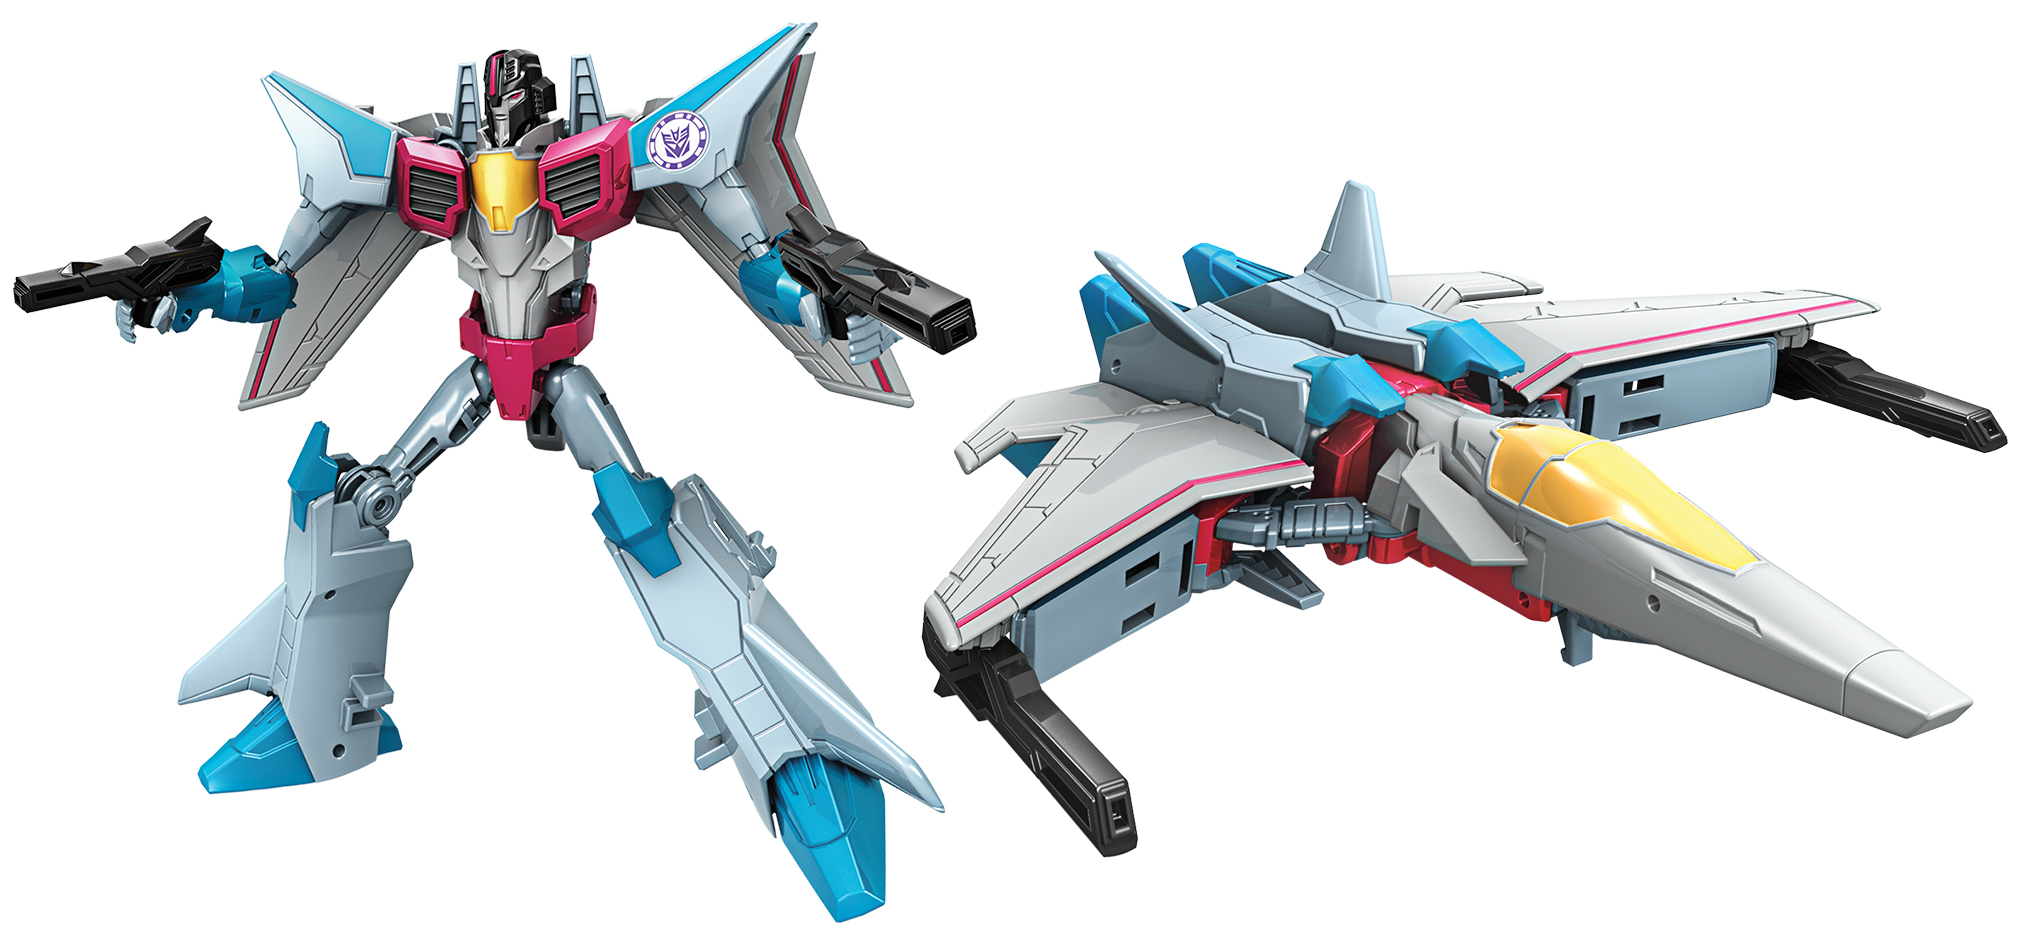 The New Robots In Disguise Toys Are Inspired By The ’80s Transformers You Grew Up With